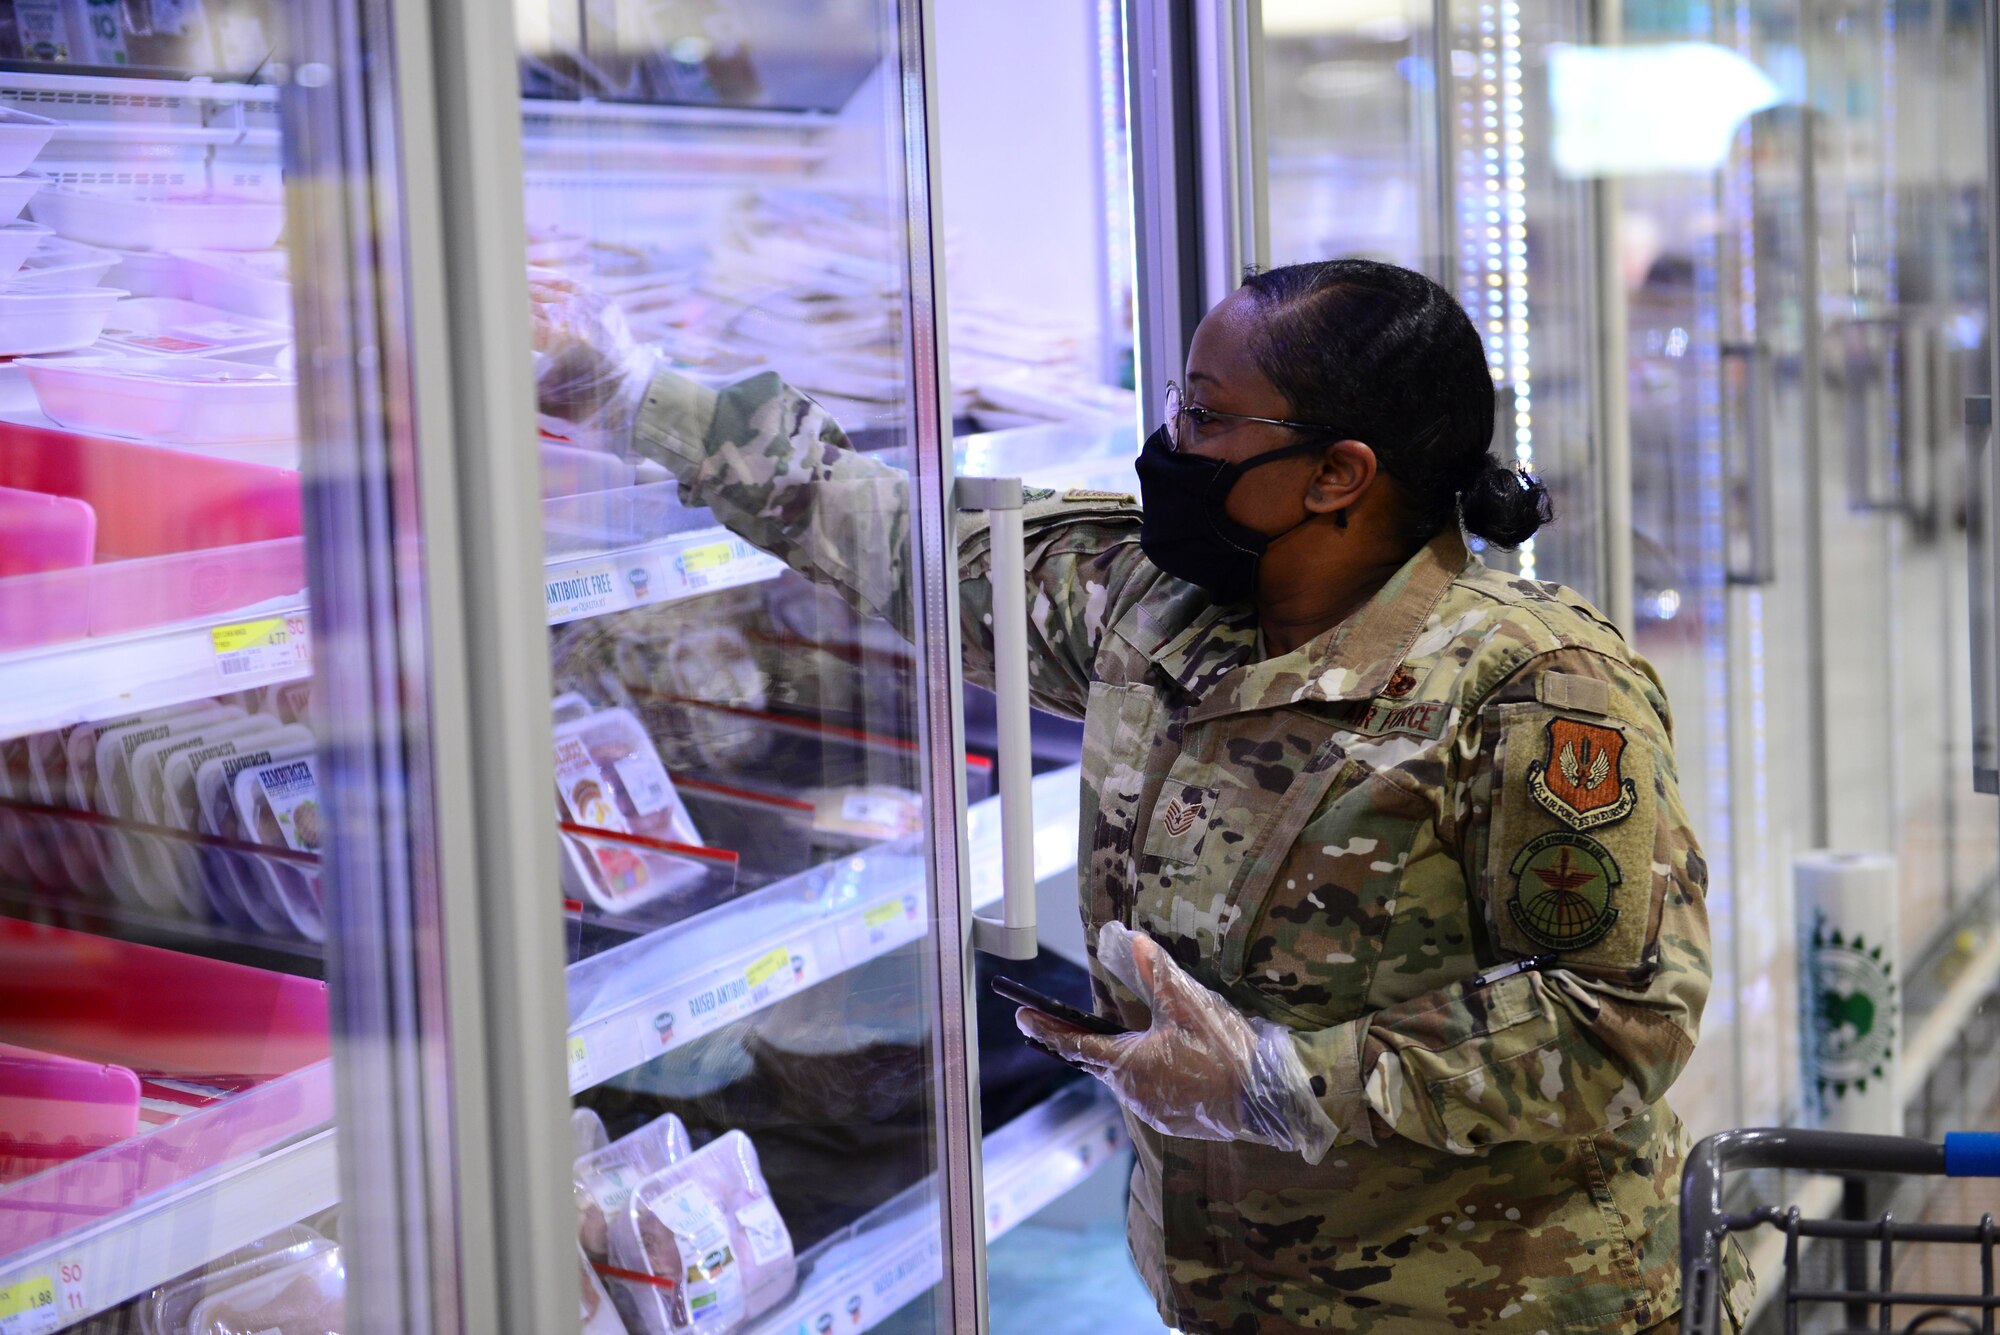 U.S. Air Force Tech. Sgt. Kahlia Rainer, volunteer, retrieves ground turkey at the commissary on Aviano Air Base, Italy, April 18, 2020. Rainer is one of more than 170 volunteers who stepped up to assist those in need by delivering groceries during the battle against COVID-19. (U.S. Air Force photo by Tech. Sgt. Tory Cusimano)